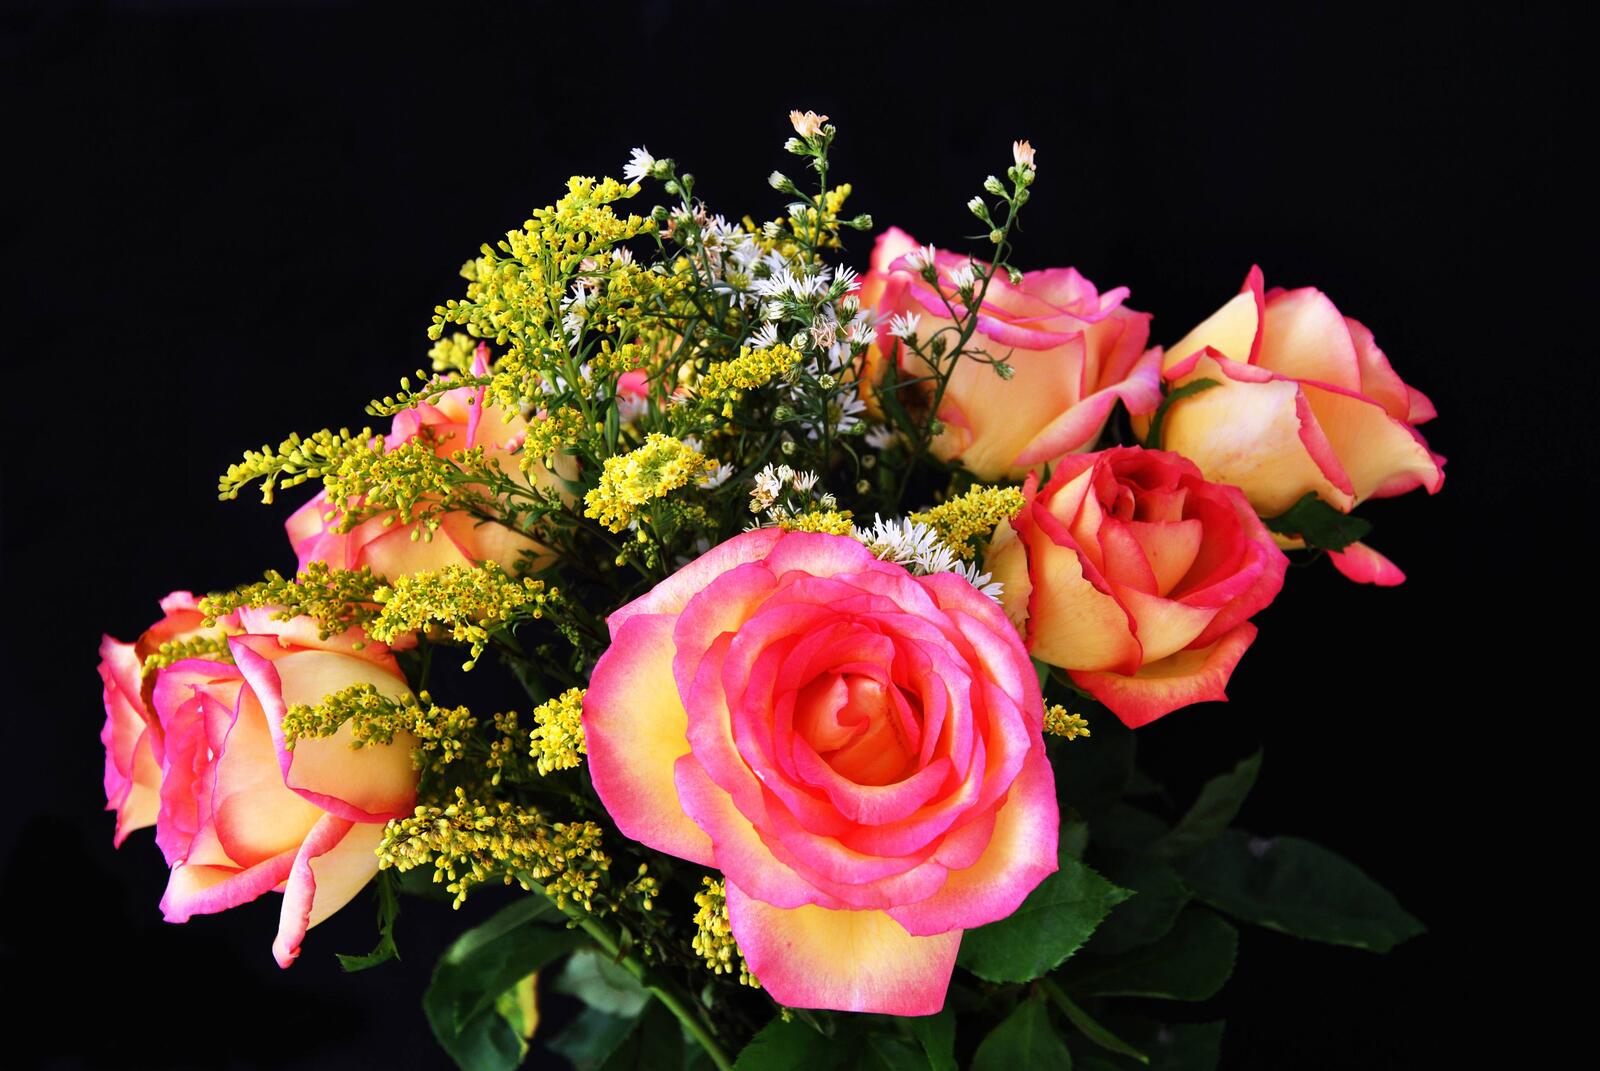 Wallpapers bouquet of pink roses rose flower on the desktop